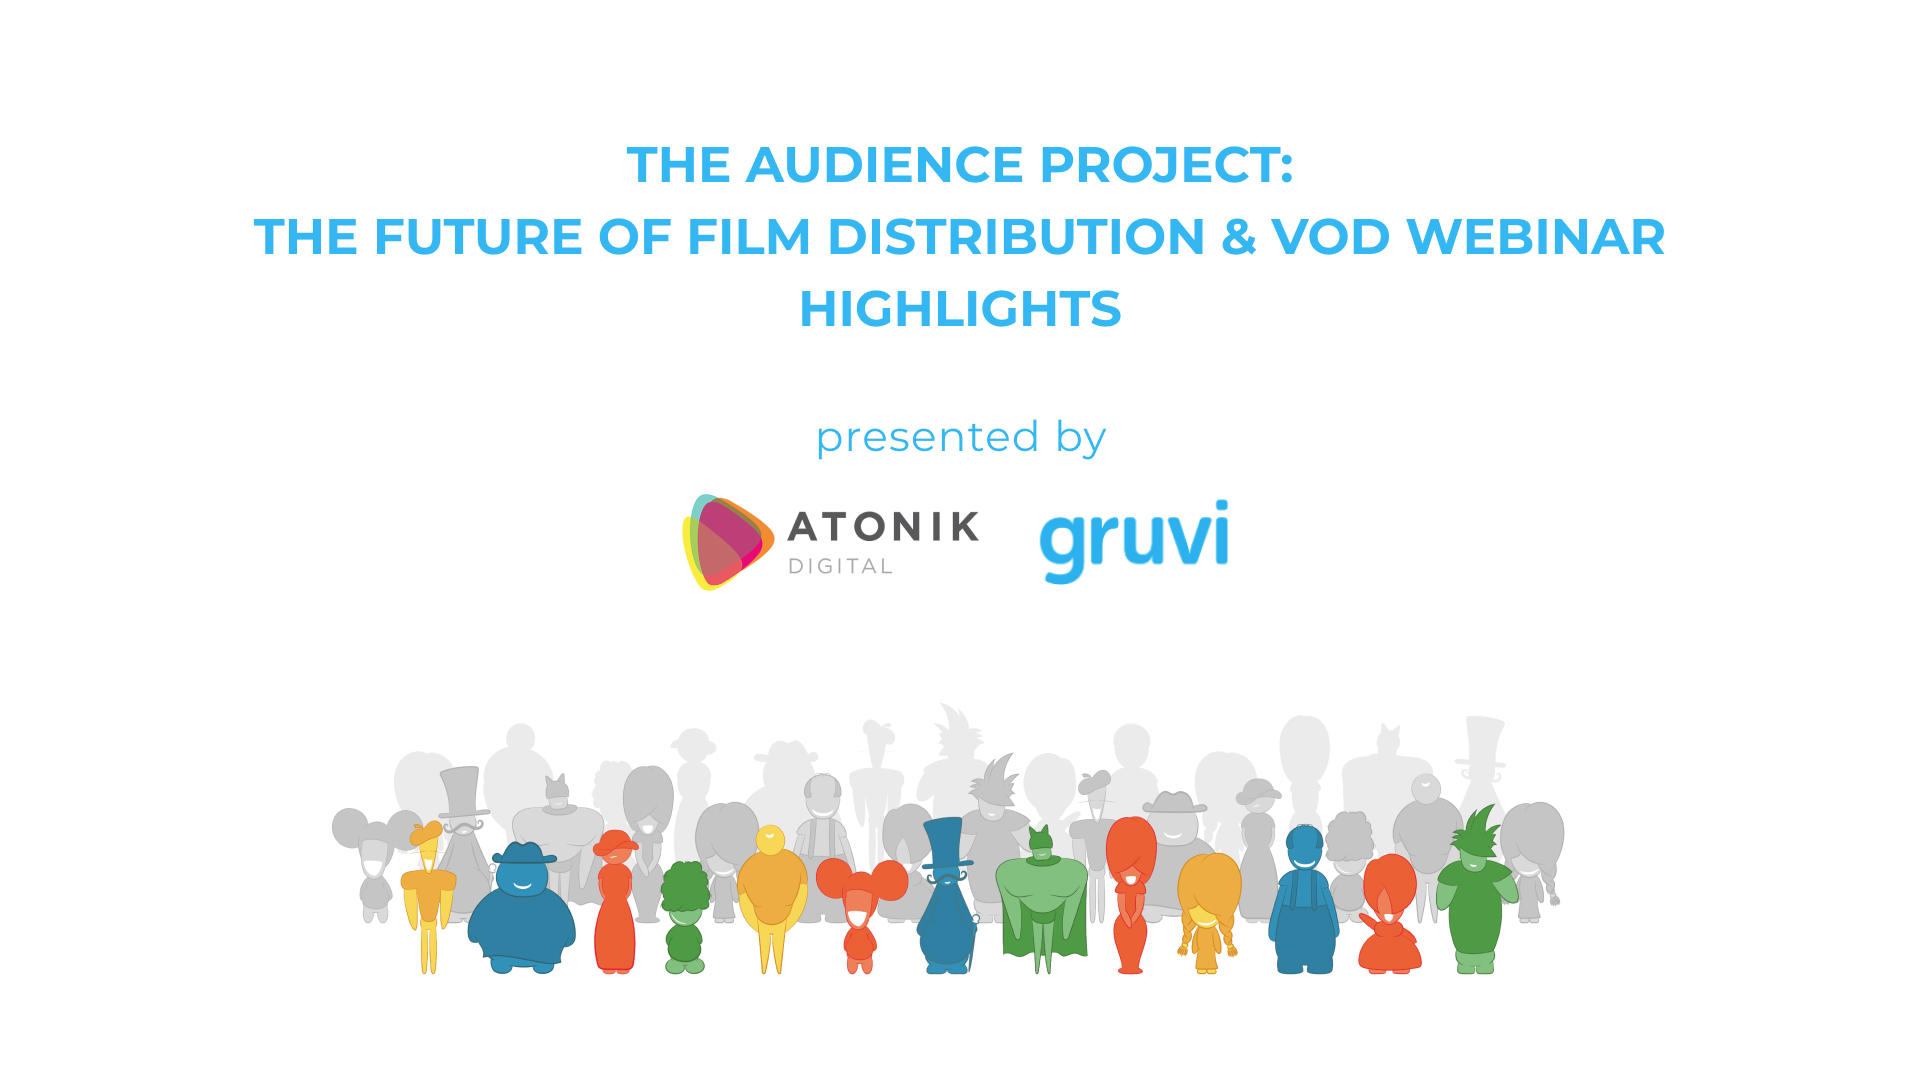 THE AUDIENCE PROJECT THE FUTURE OF FILM DISTRIBUTION and VOD WEBINAR